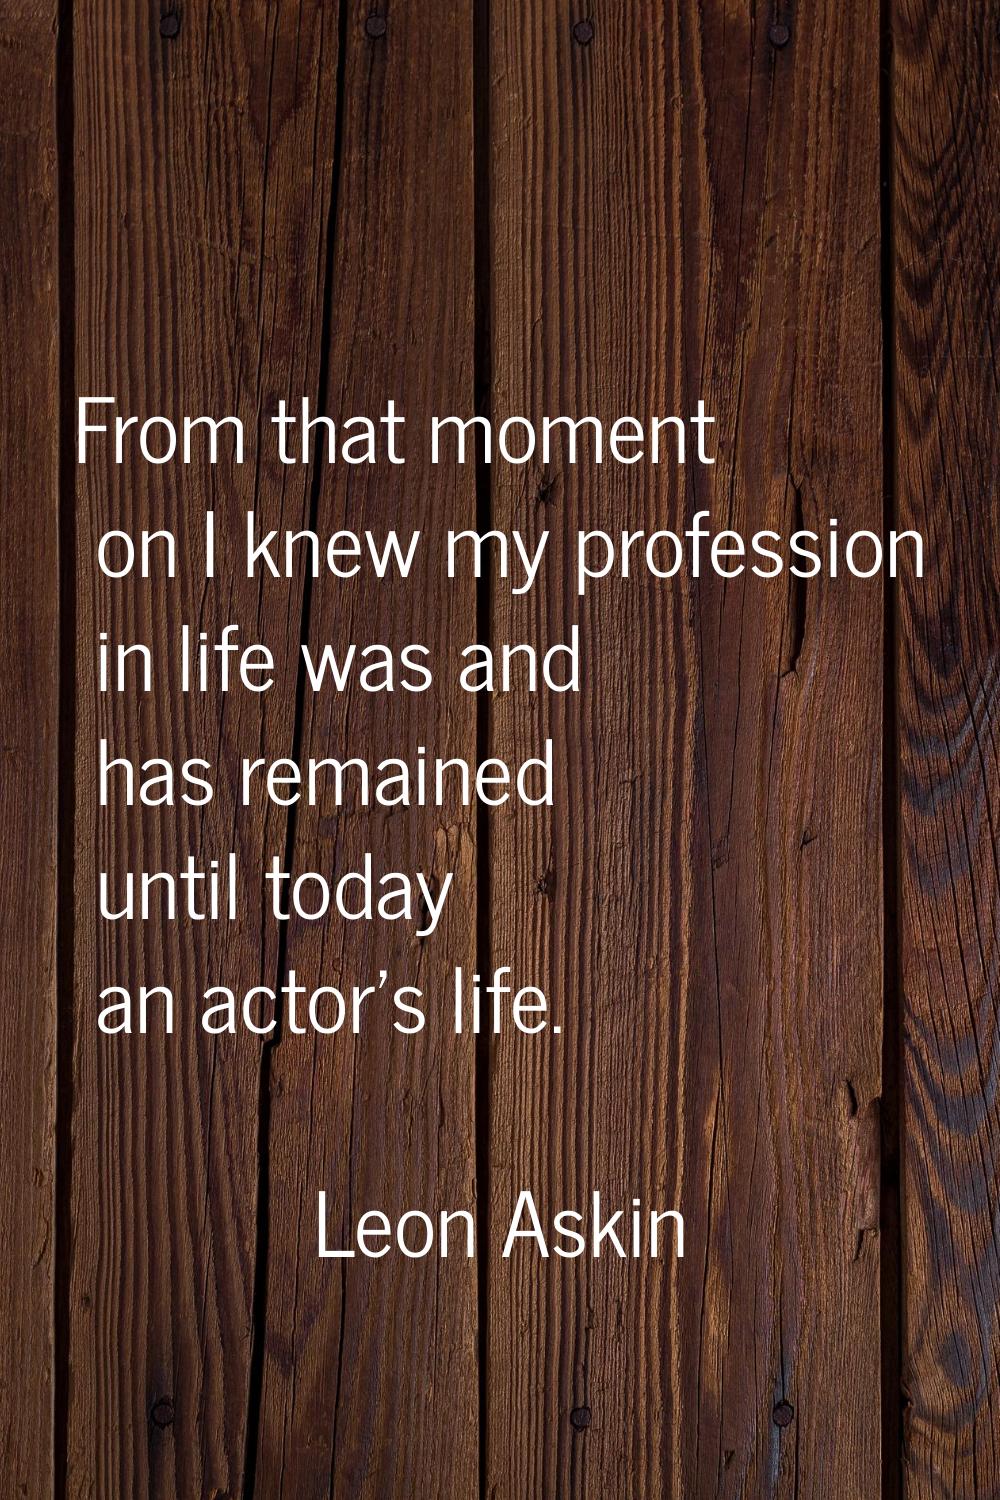 From that moment on I knew my profession in life was and has remained until today an actor's life.